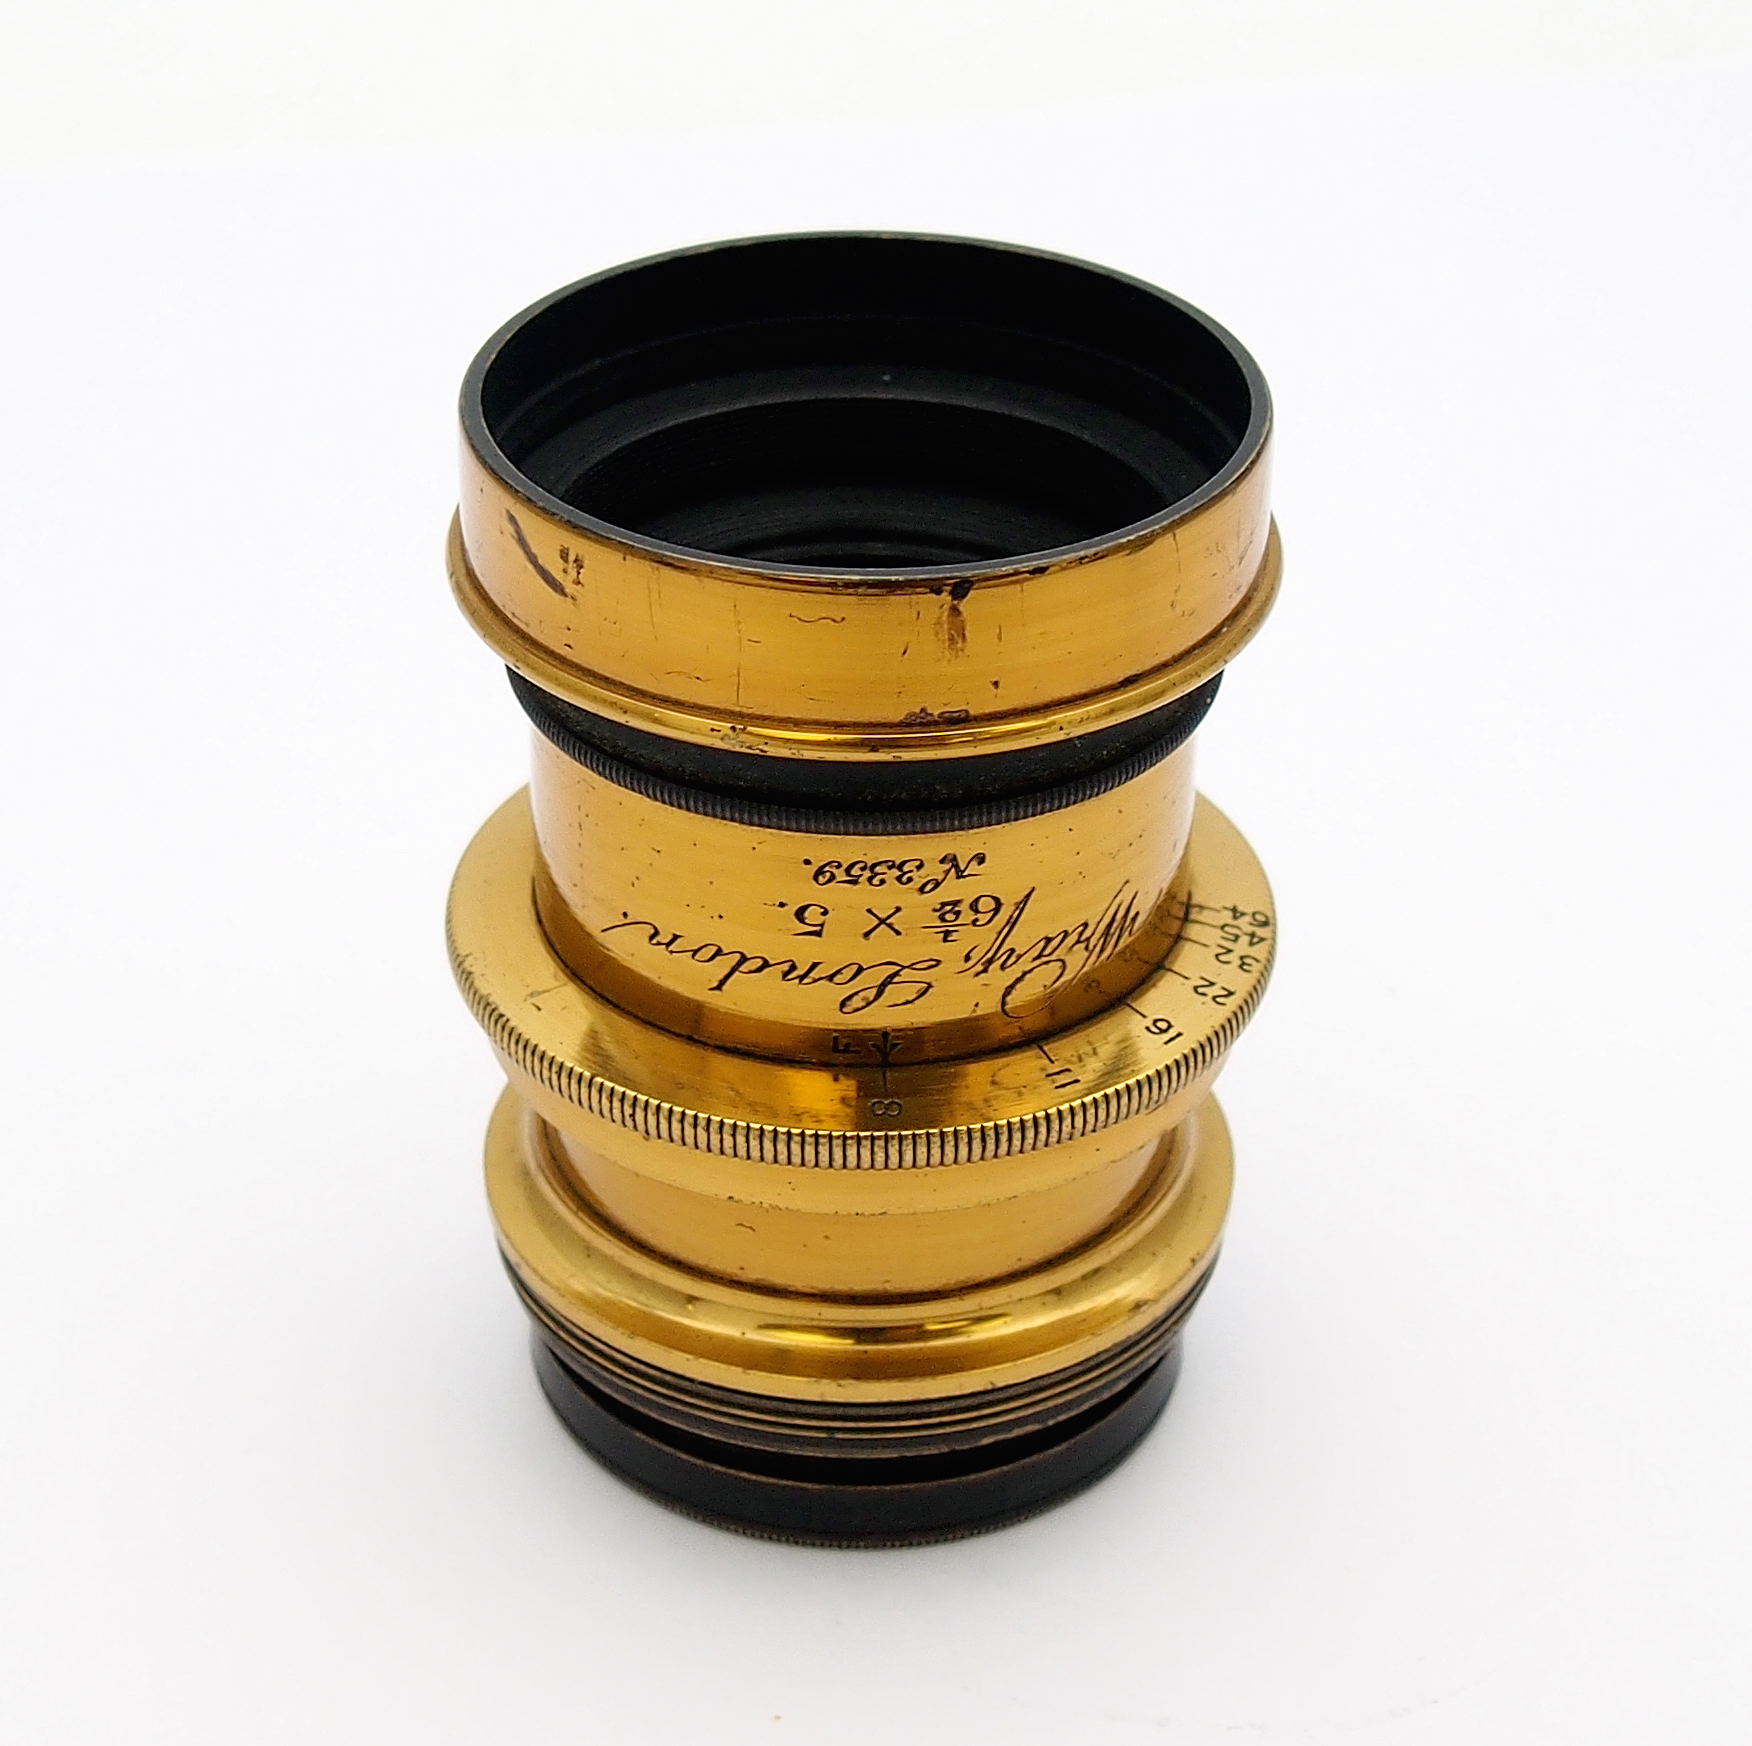 Wray Antique Brass 8 inch F8 Lens #9614